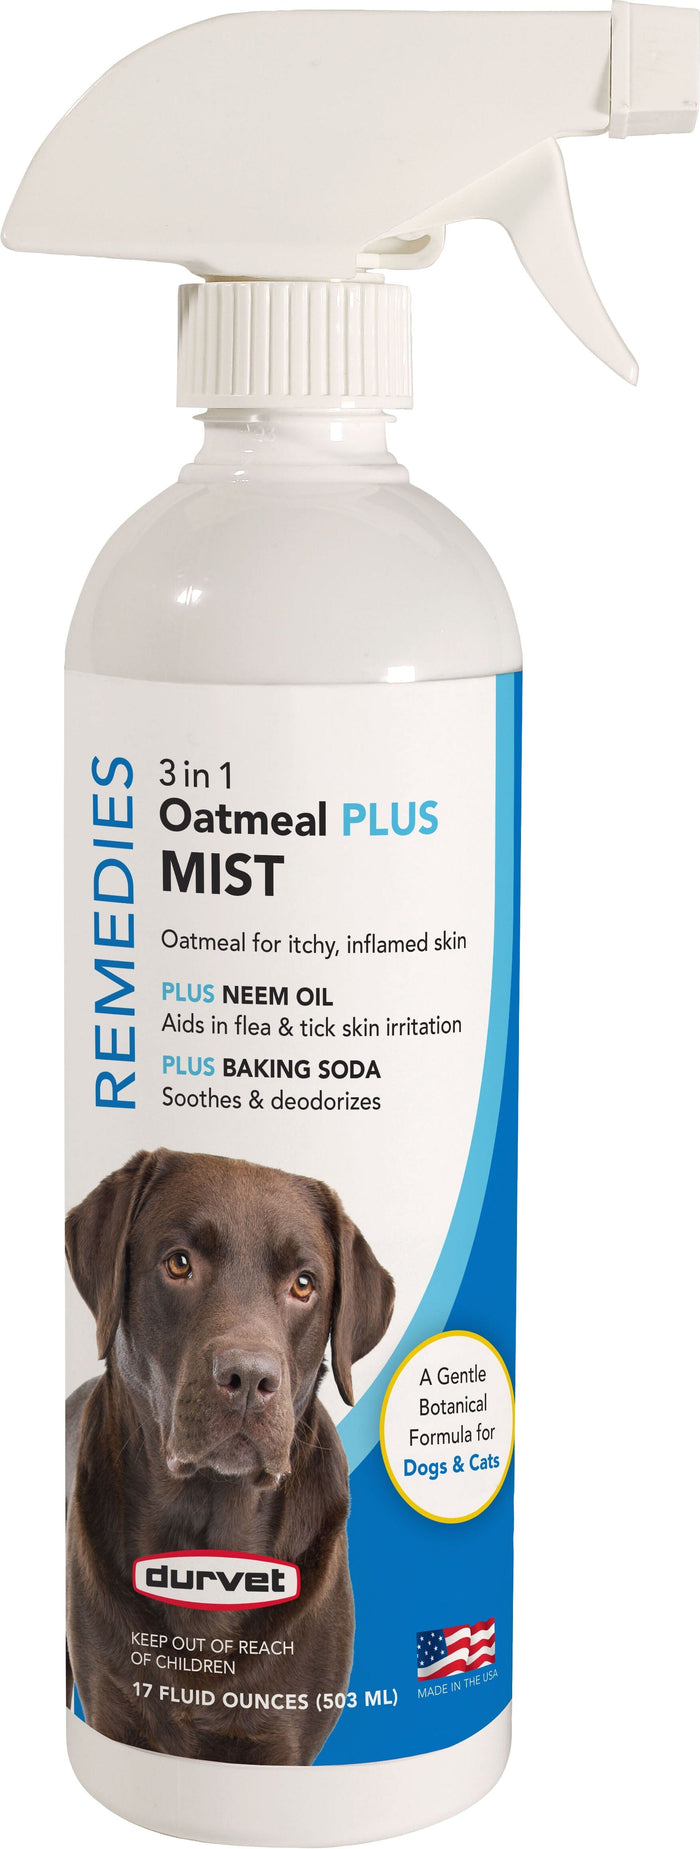 Durvet Naturals 3 In 1 Oatmeal Plus Mist for Dogs - 17 Oz